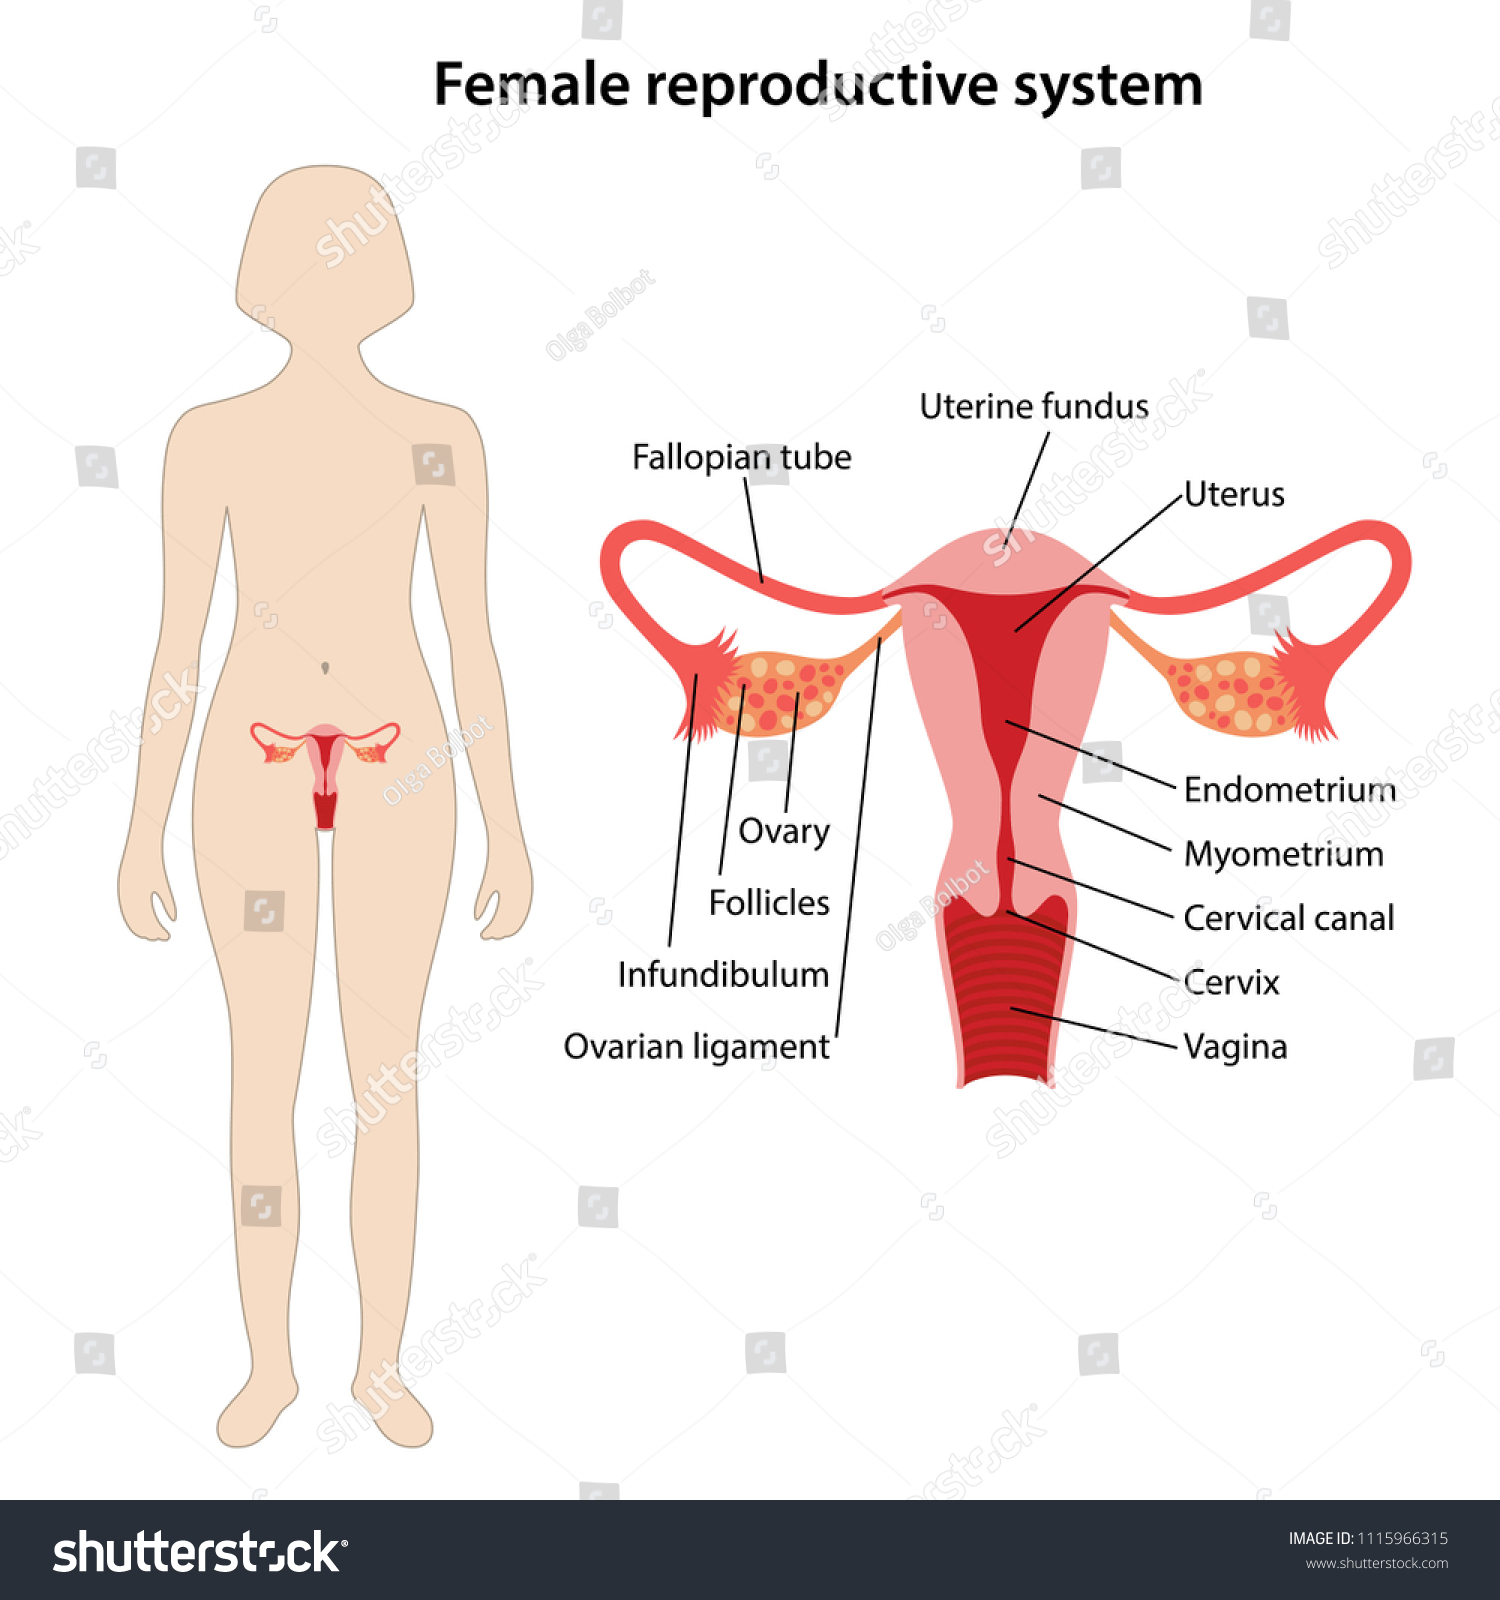 Female Reproductive System Main Parts Labeled Stock Vector Royalty Free 1115966315